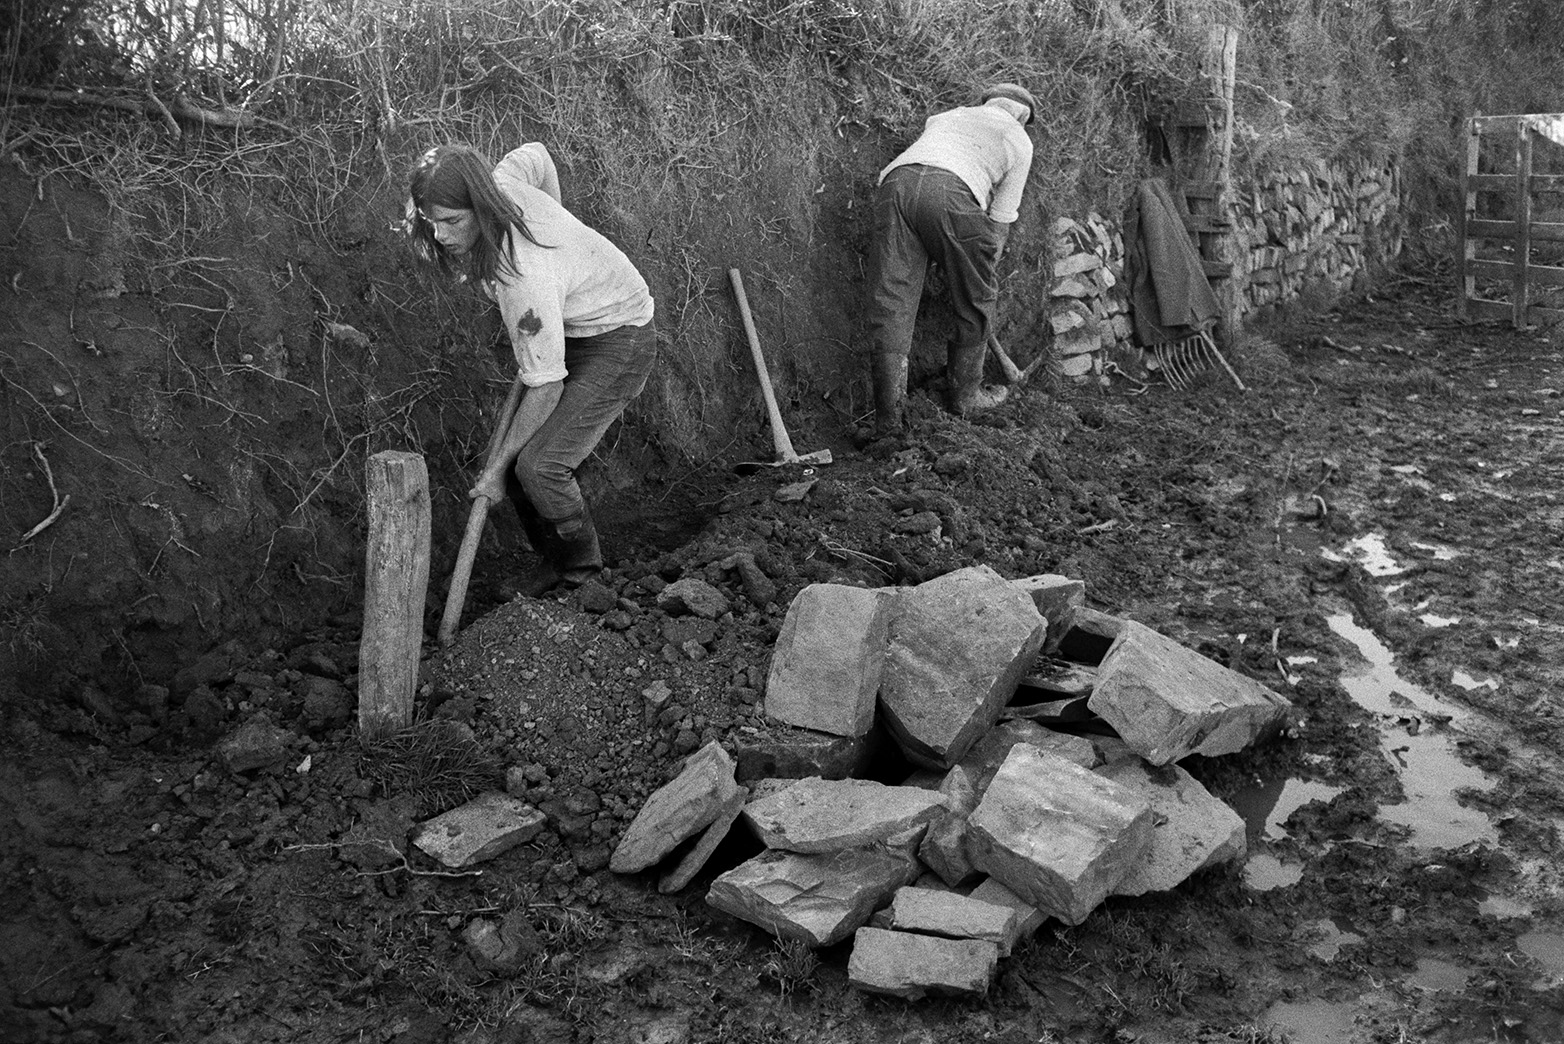 Derek Bright, on the left, helping Tom Hooper clear a hedge bank and build a stone wall to support, in a field at Mill Road Farm, Beaford. They are using axes to clear the bottom of the earth bank. A pile of stones for the wall is in the foreground. The farm was also known as Jeffrys.